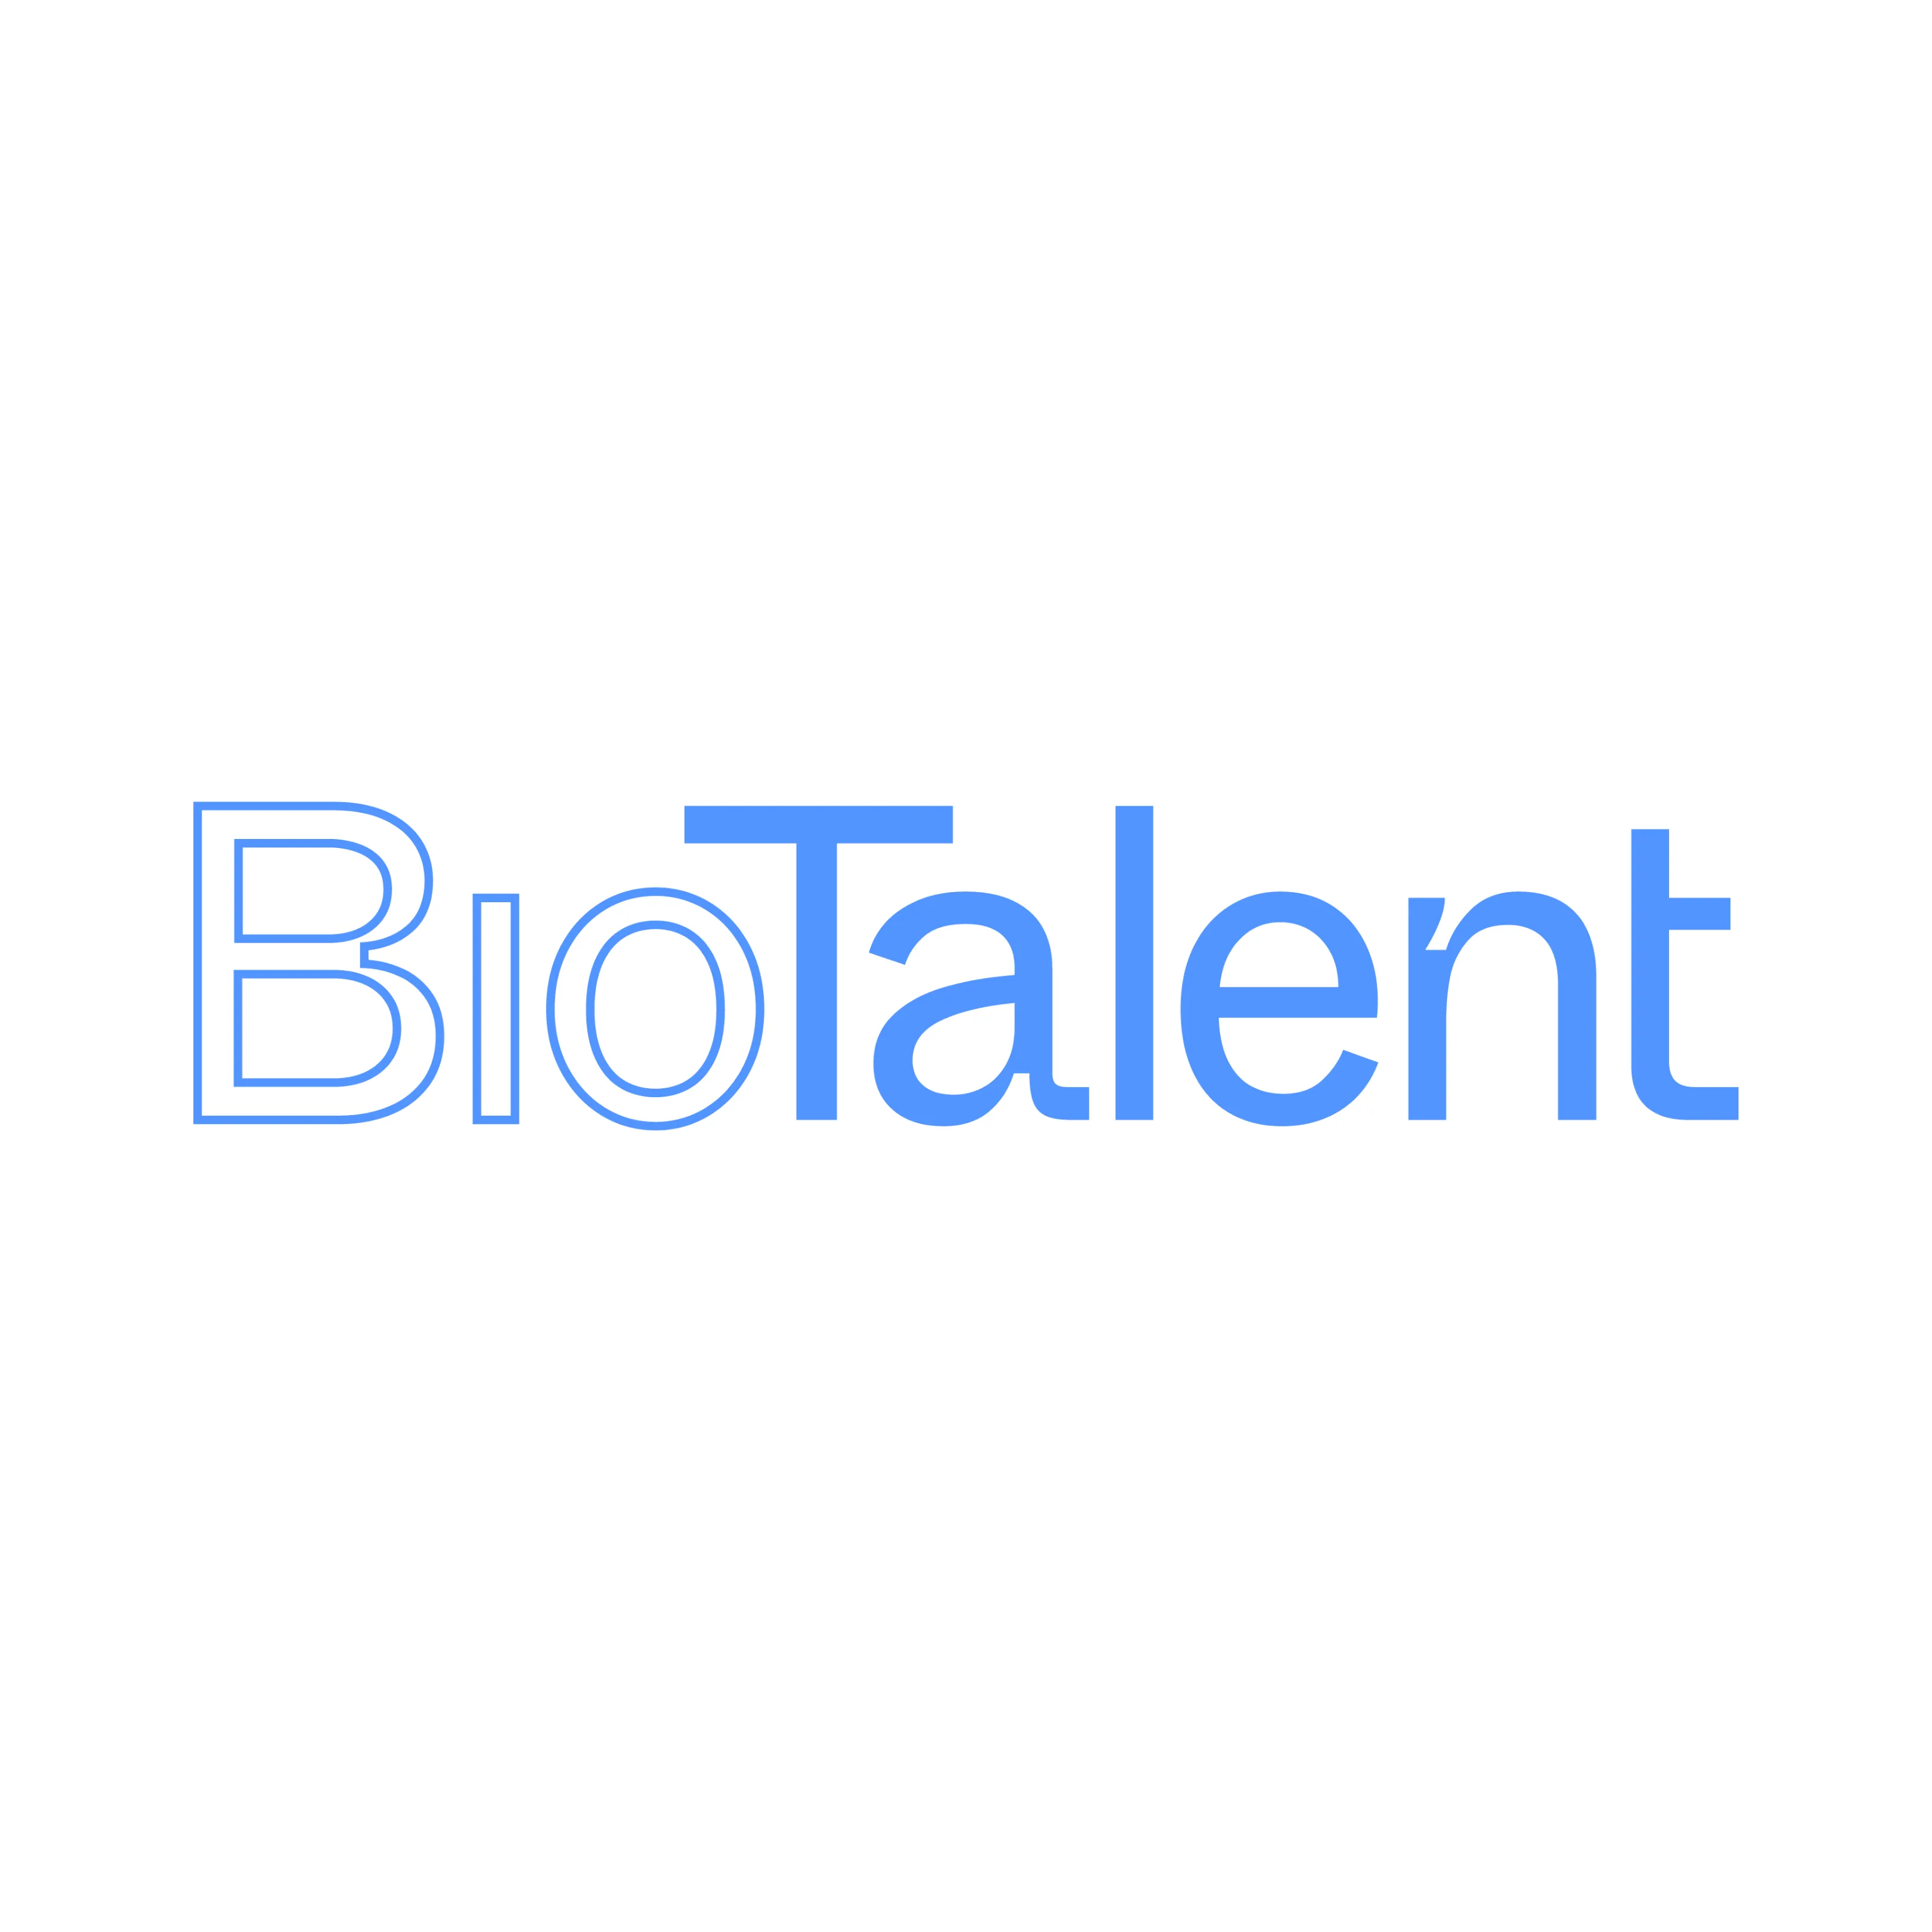 BioTalent was founded